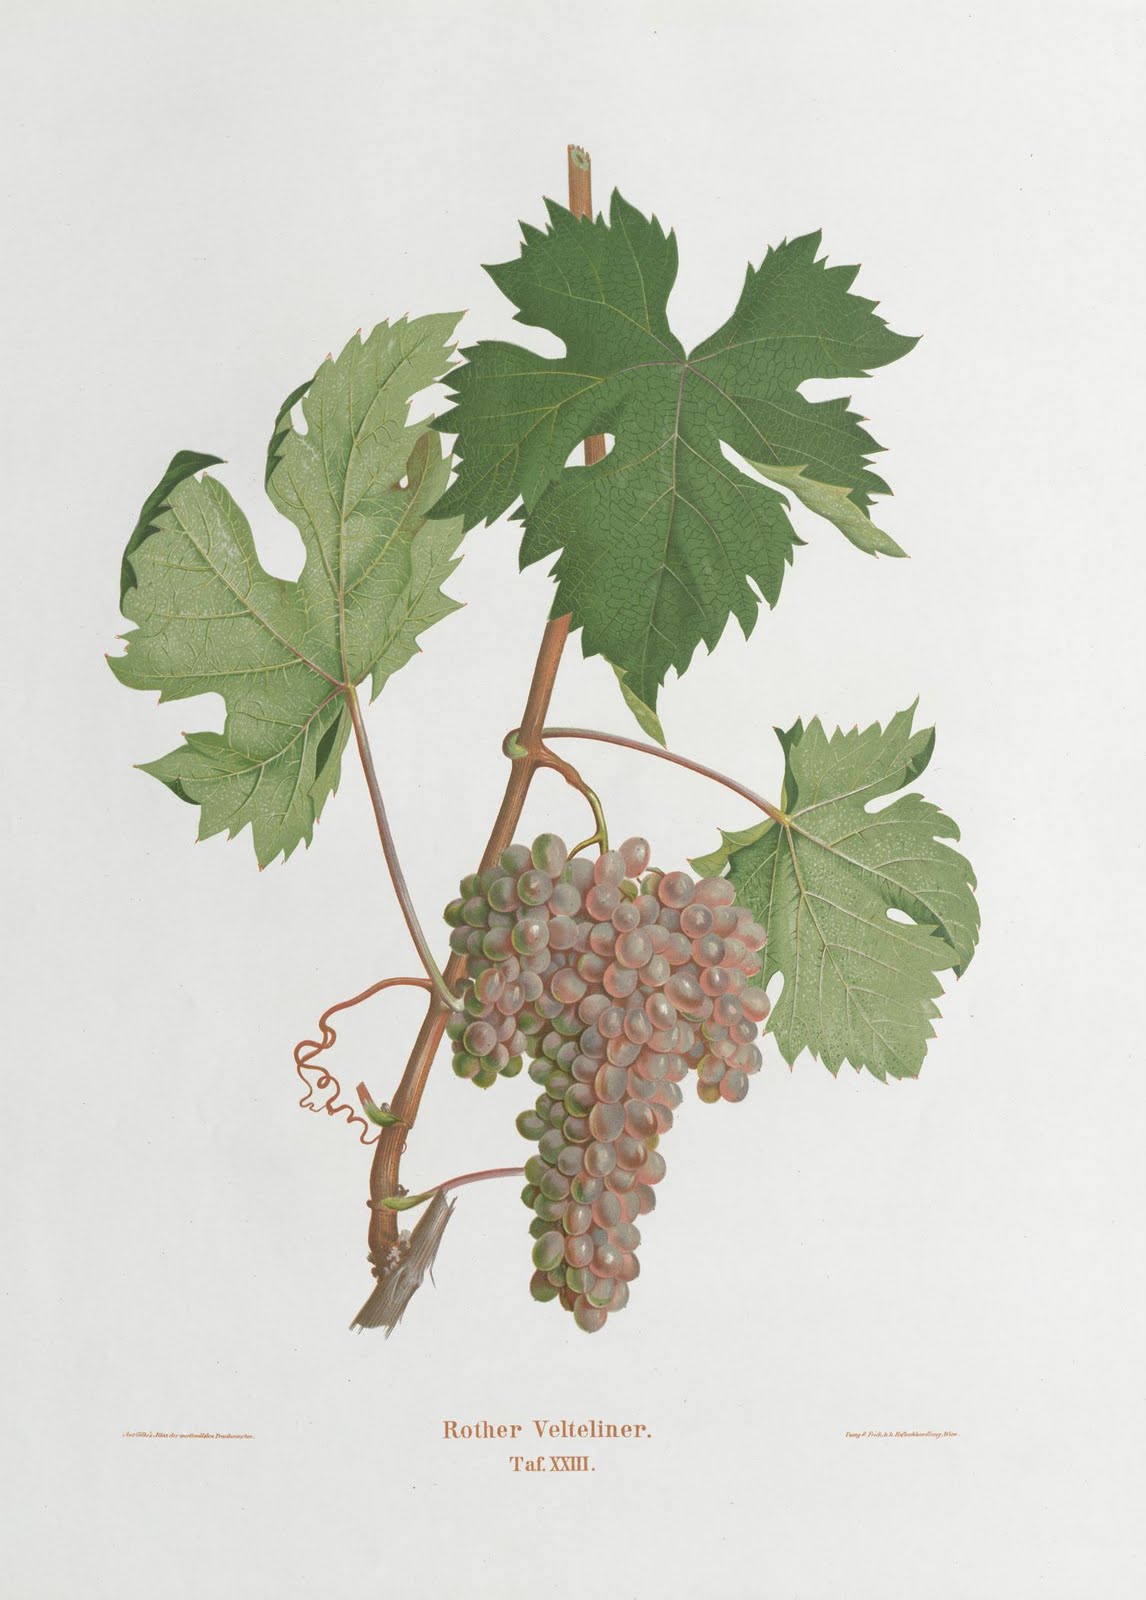 book illustration of bunch of grapes